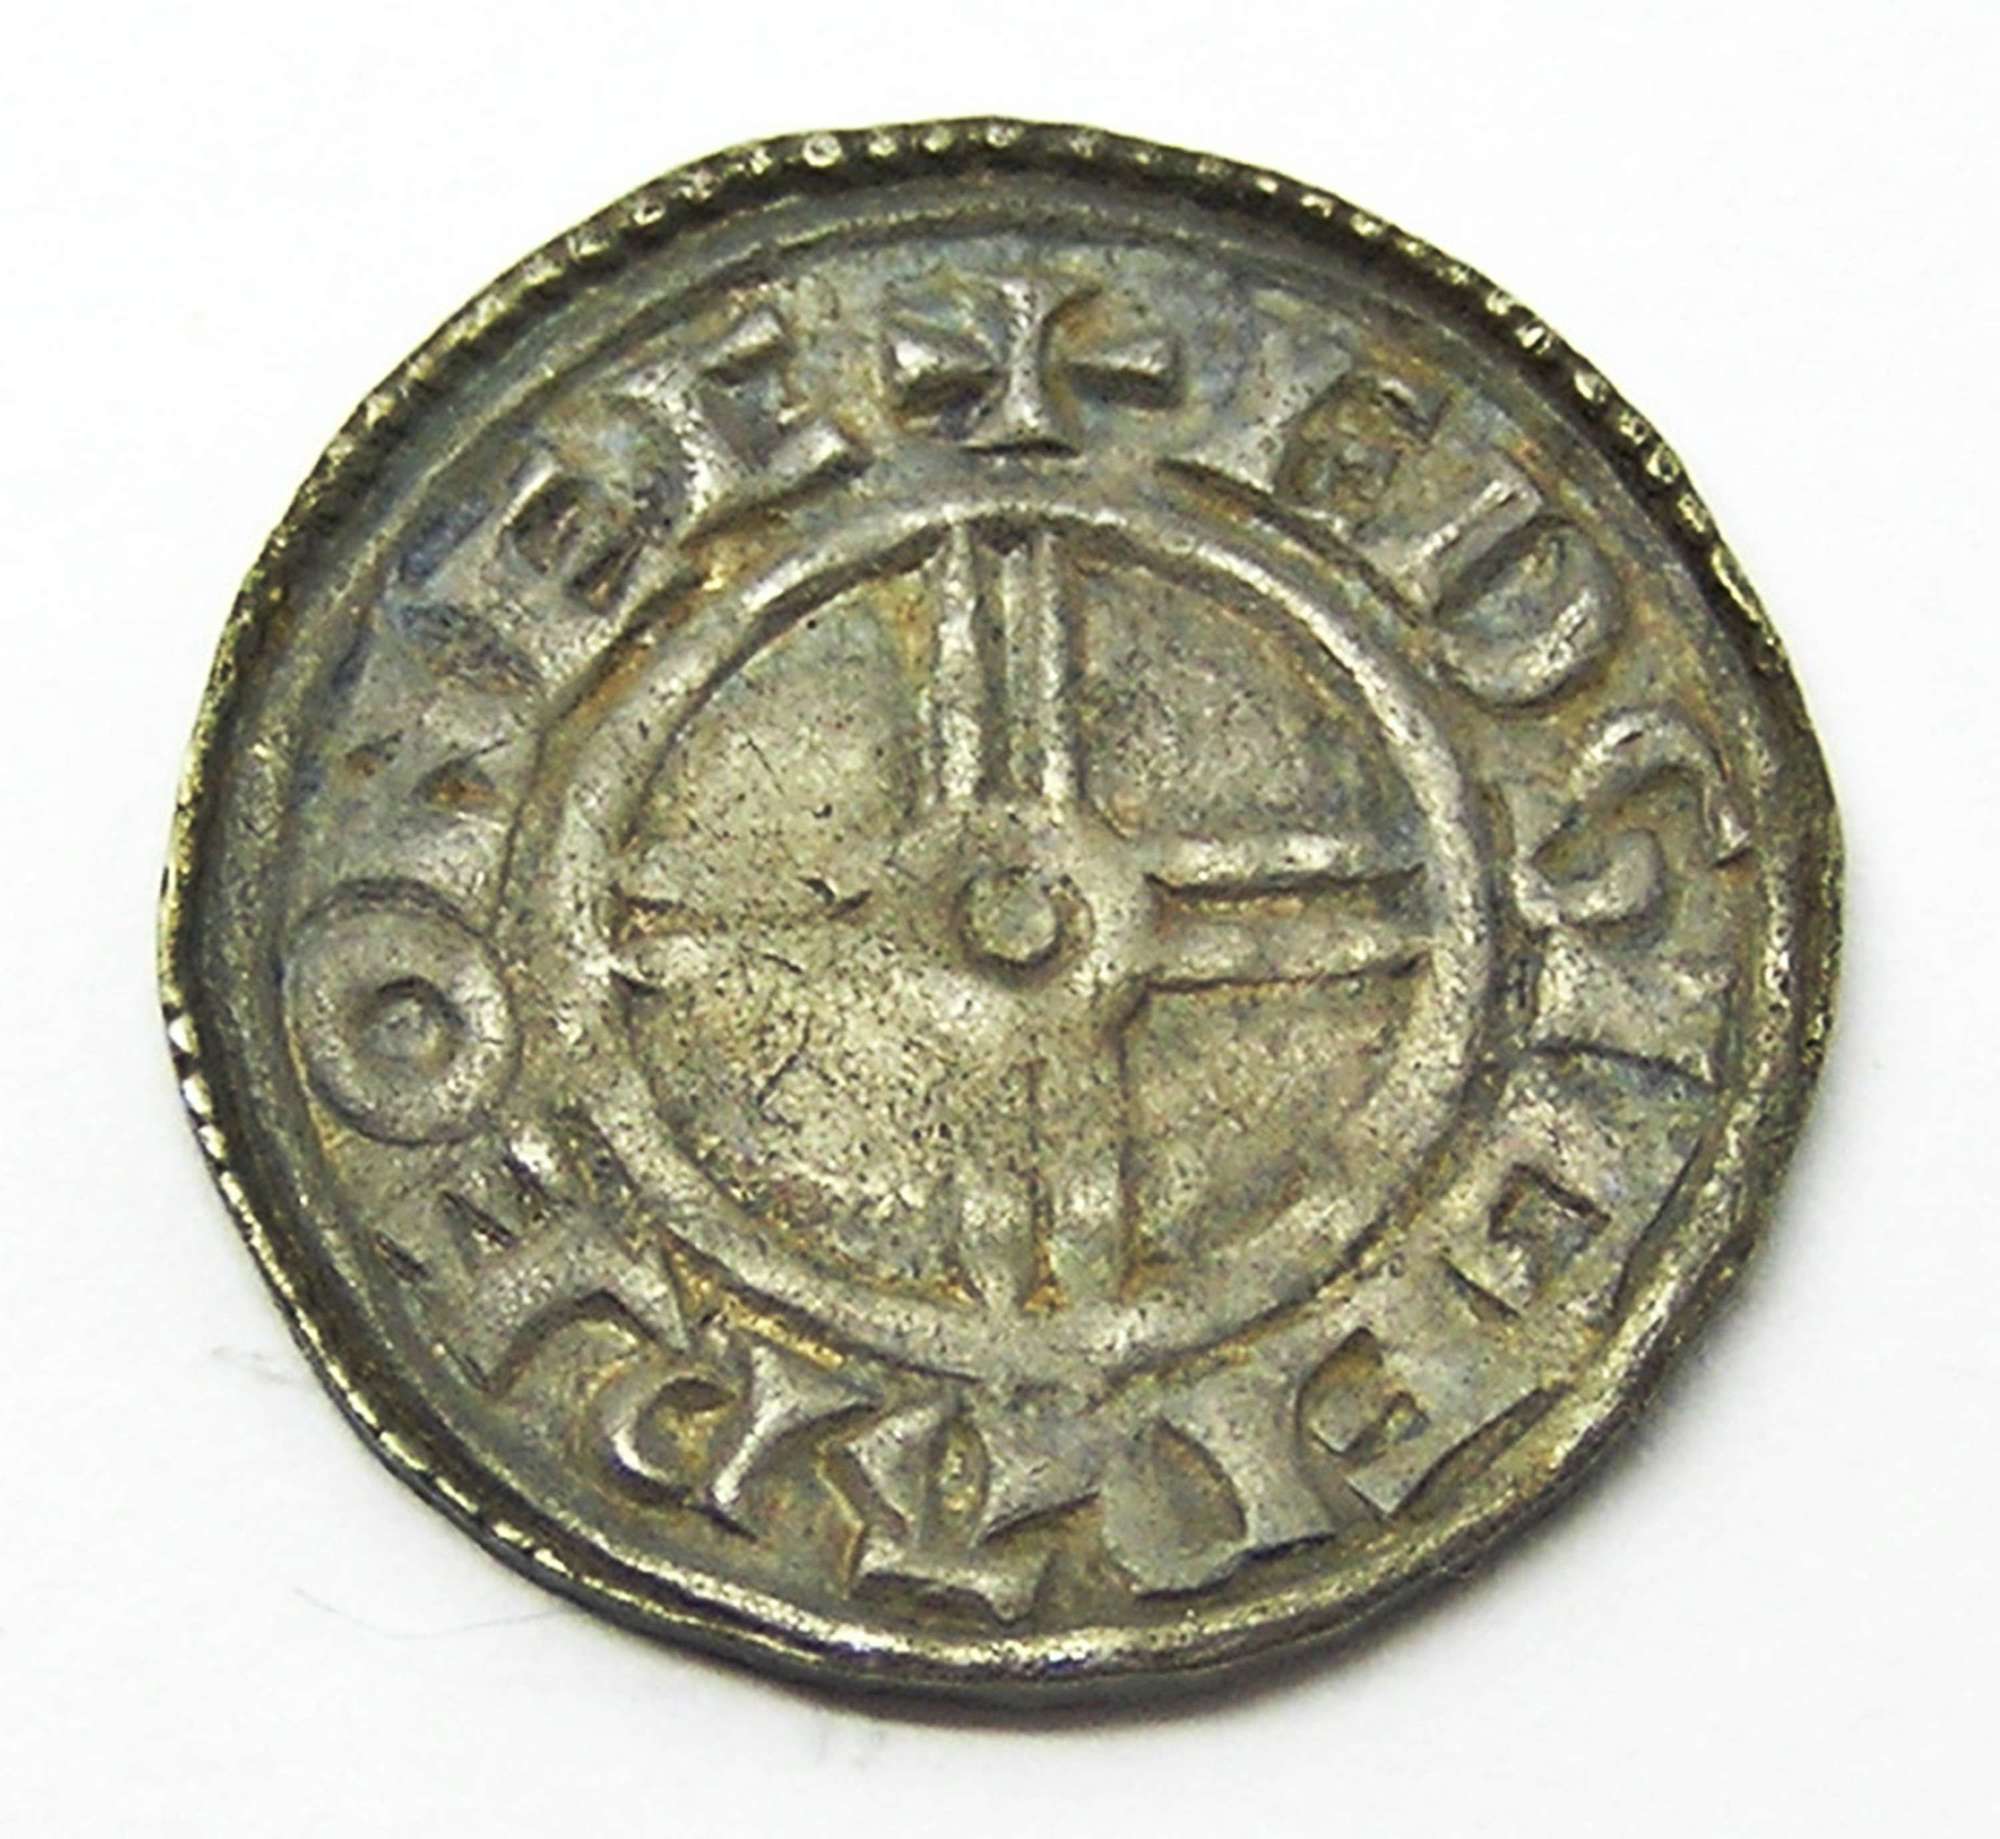 Anglo Saxon King Canute silver penny EDSIGEǷARE of York